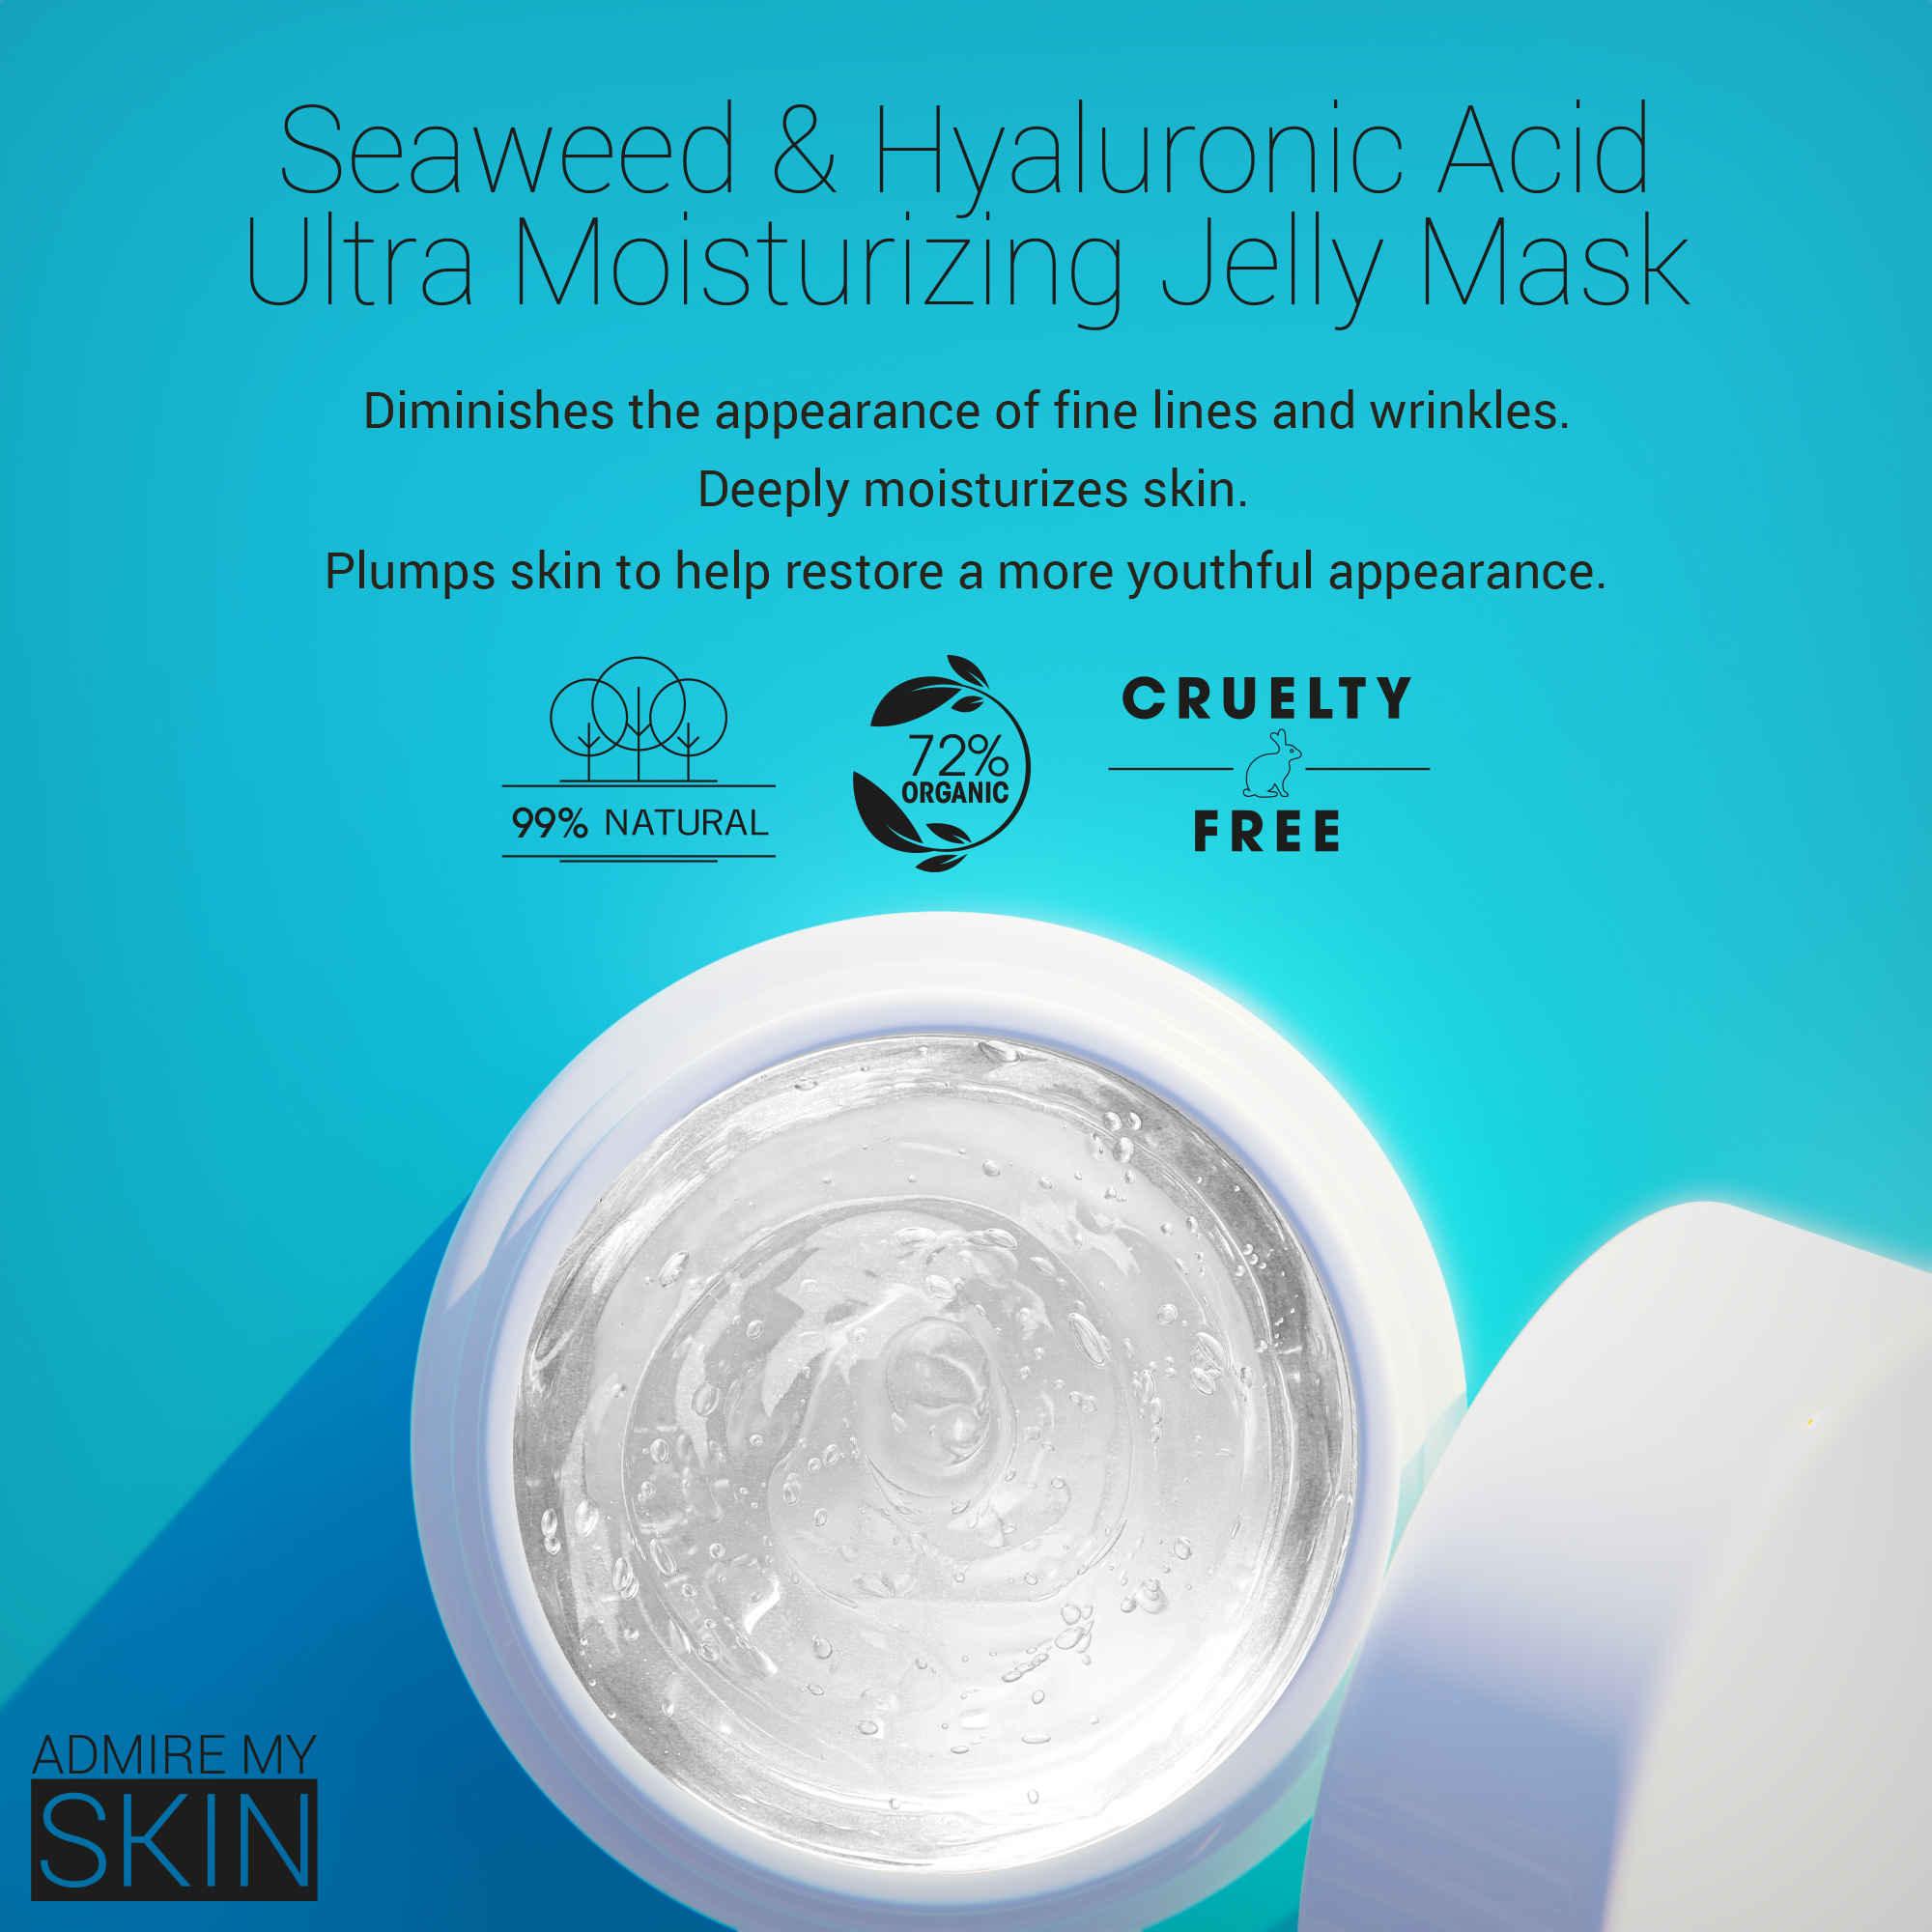 Jelly Mask With Seaweed & Hyaluronic Acid - Admire My Skin